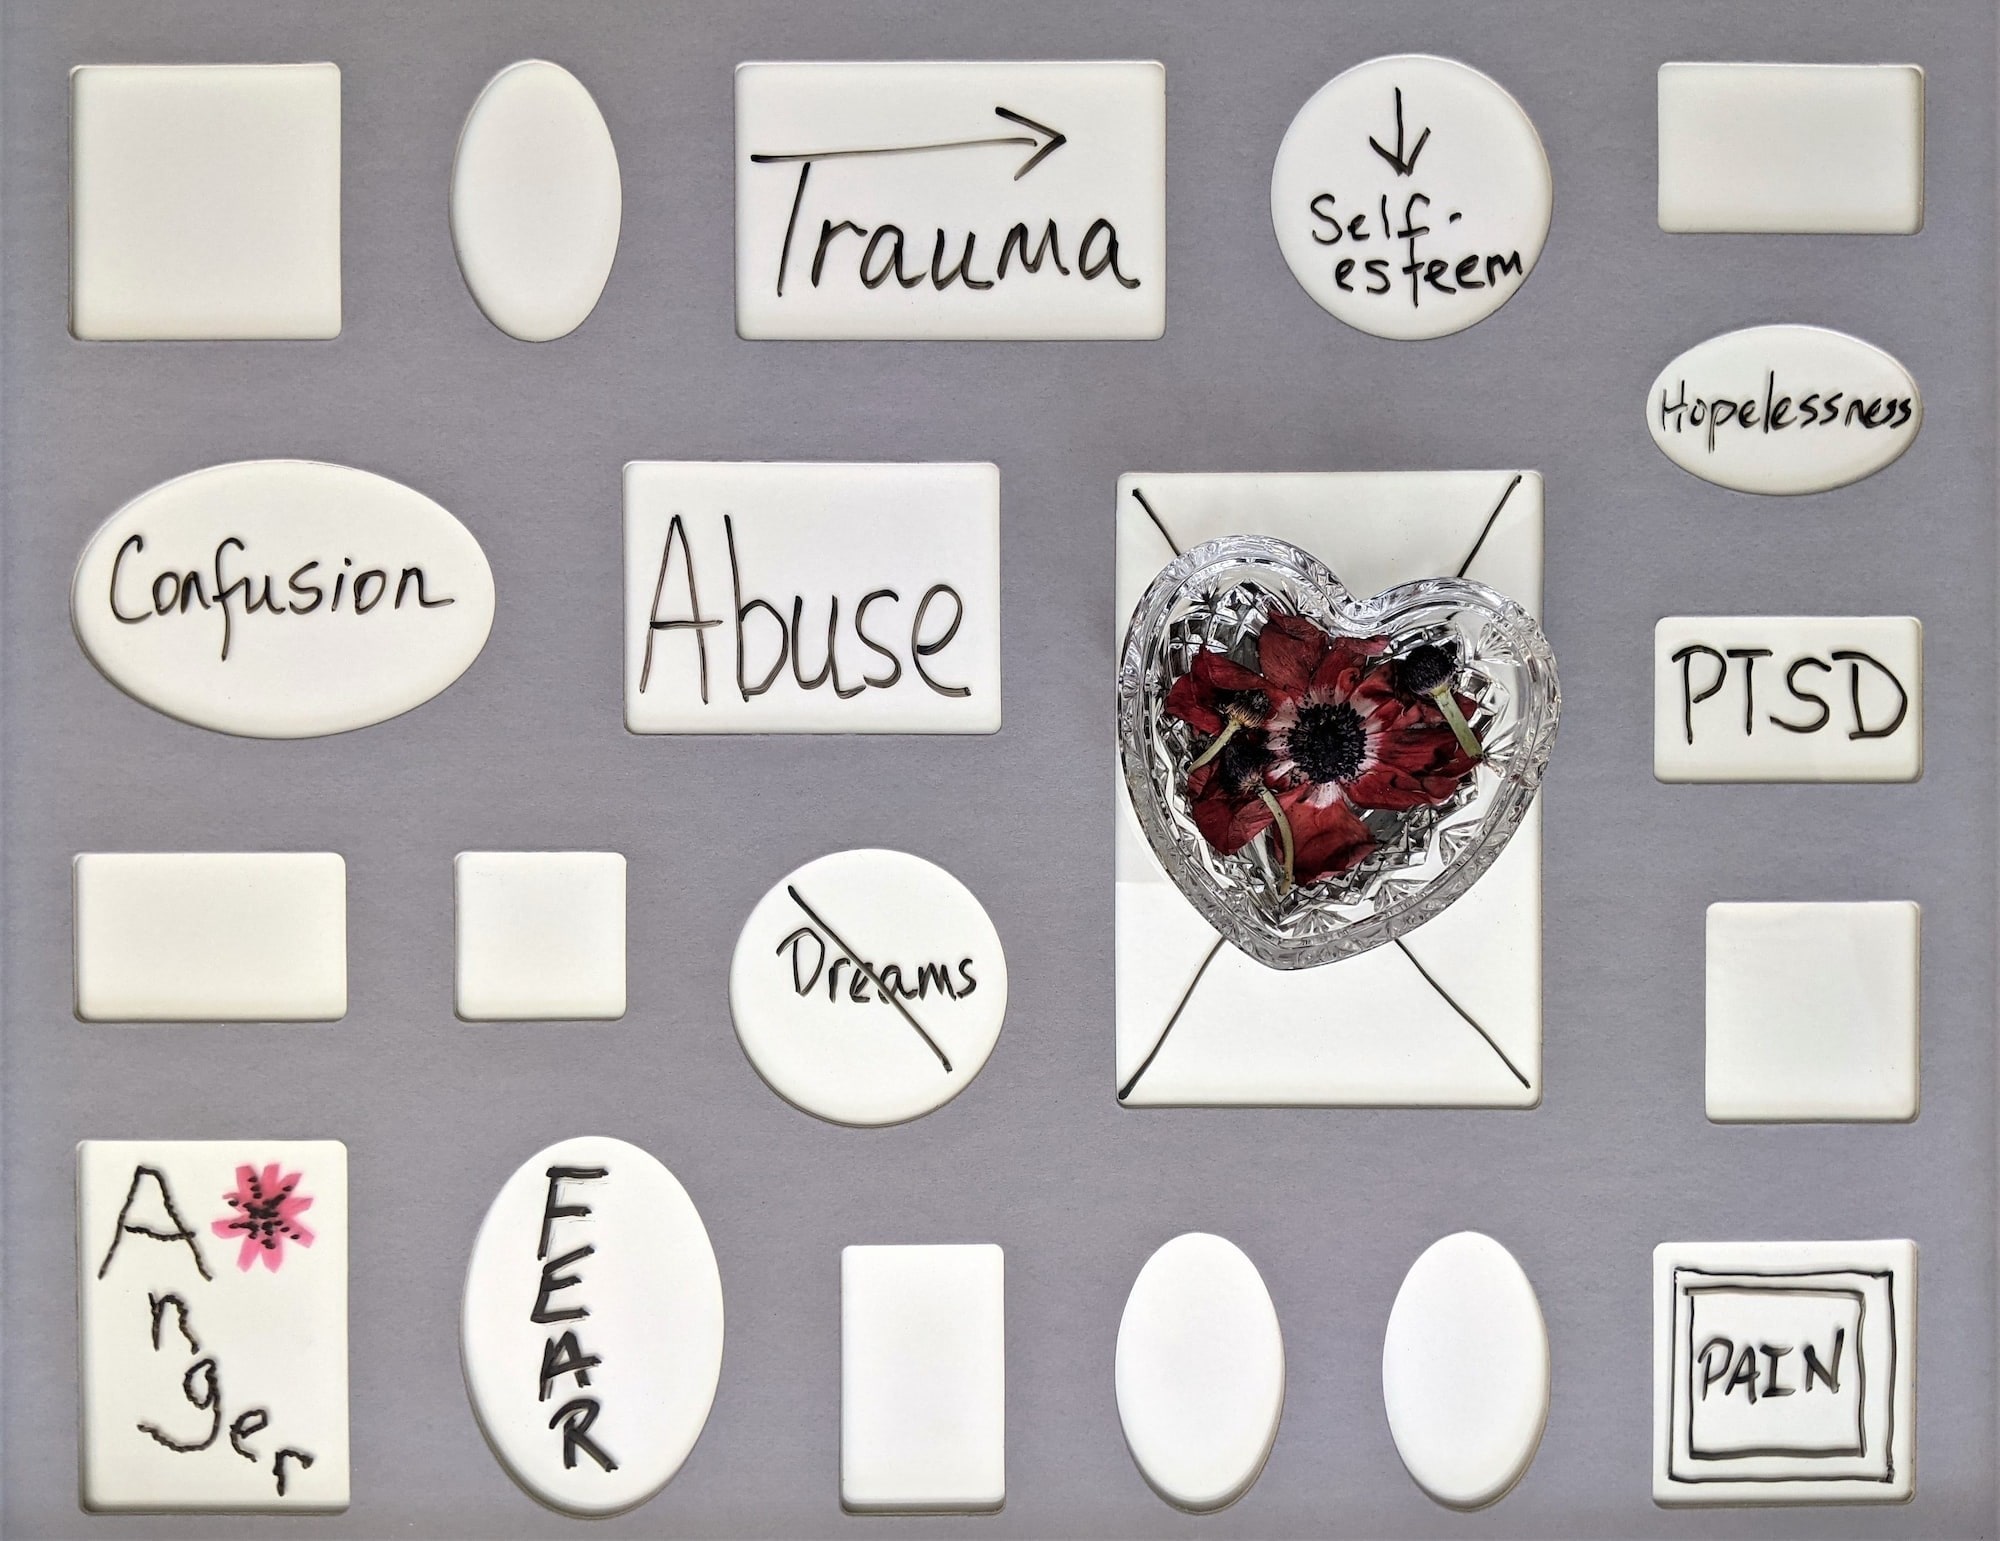 Image focused on trauma and PTSD. Image links to webpage with detailed information regarding trauma and therapy services.